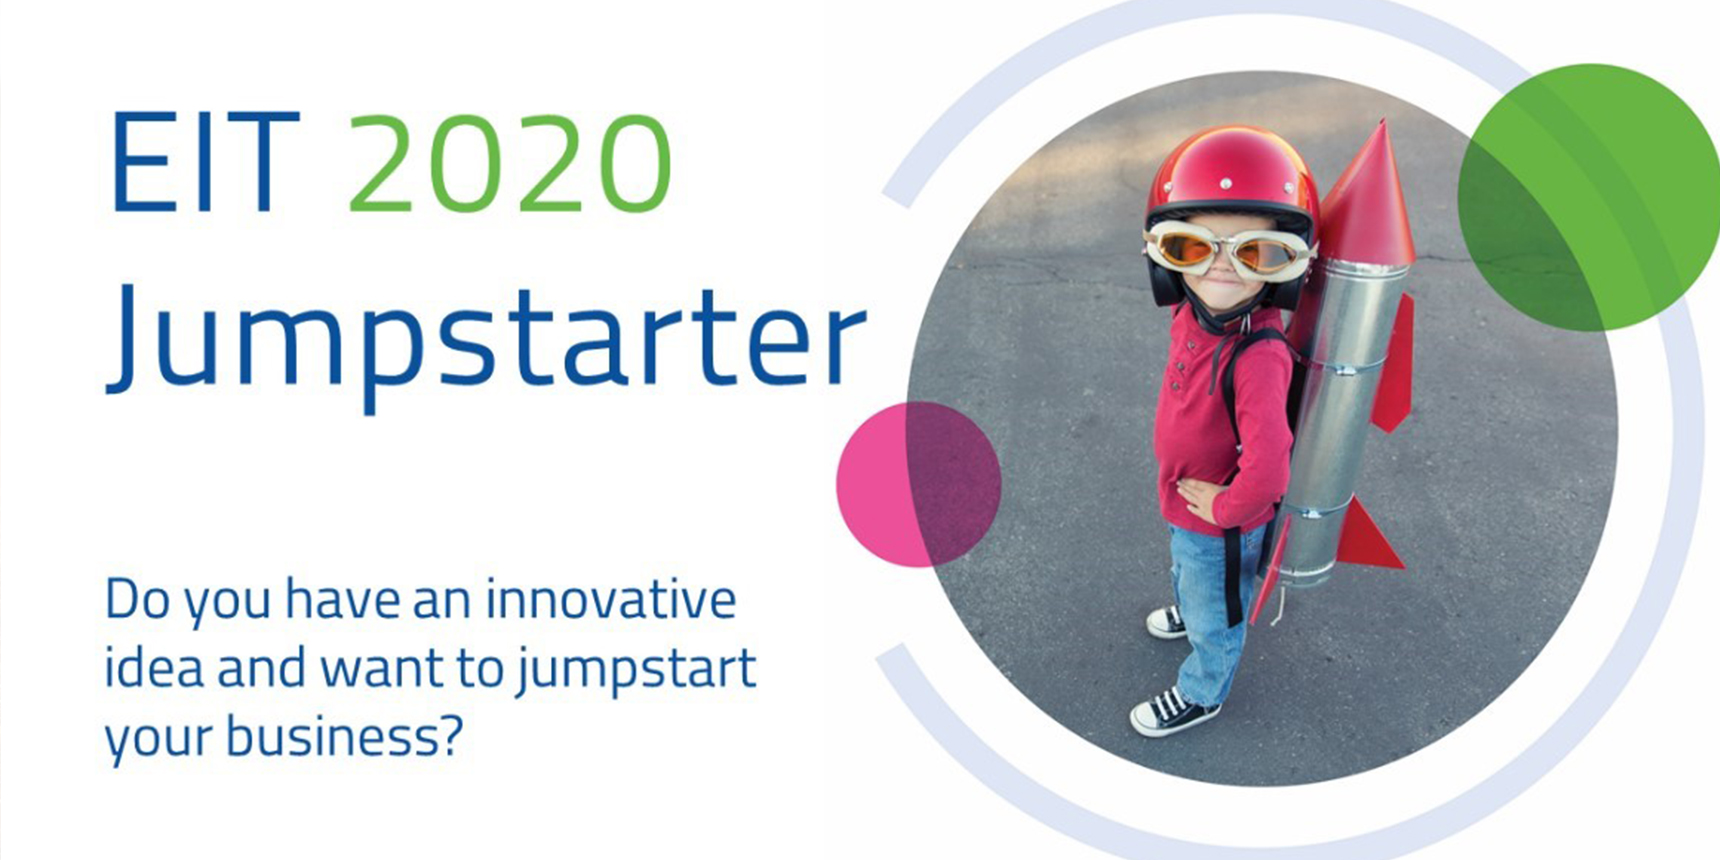 The EIT Community is getting ready for the EIT Jumpstarter 2020 Grand Final